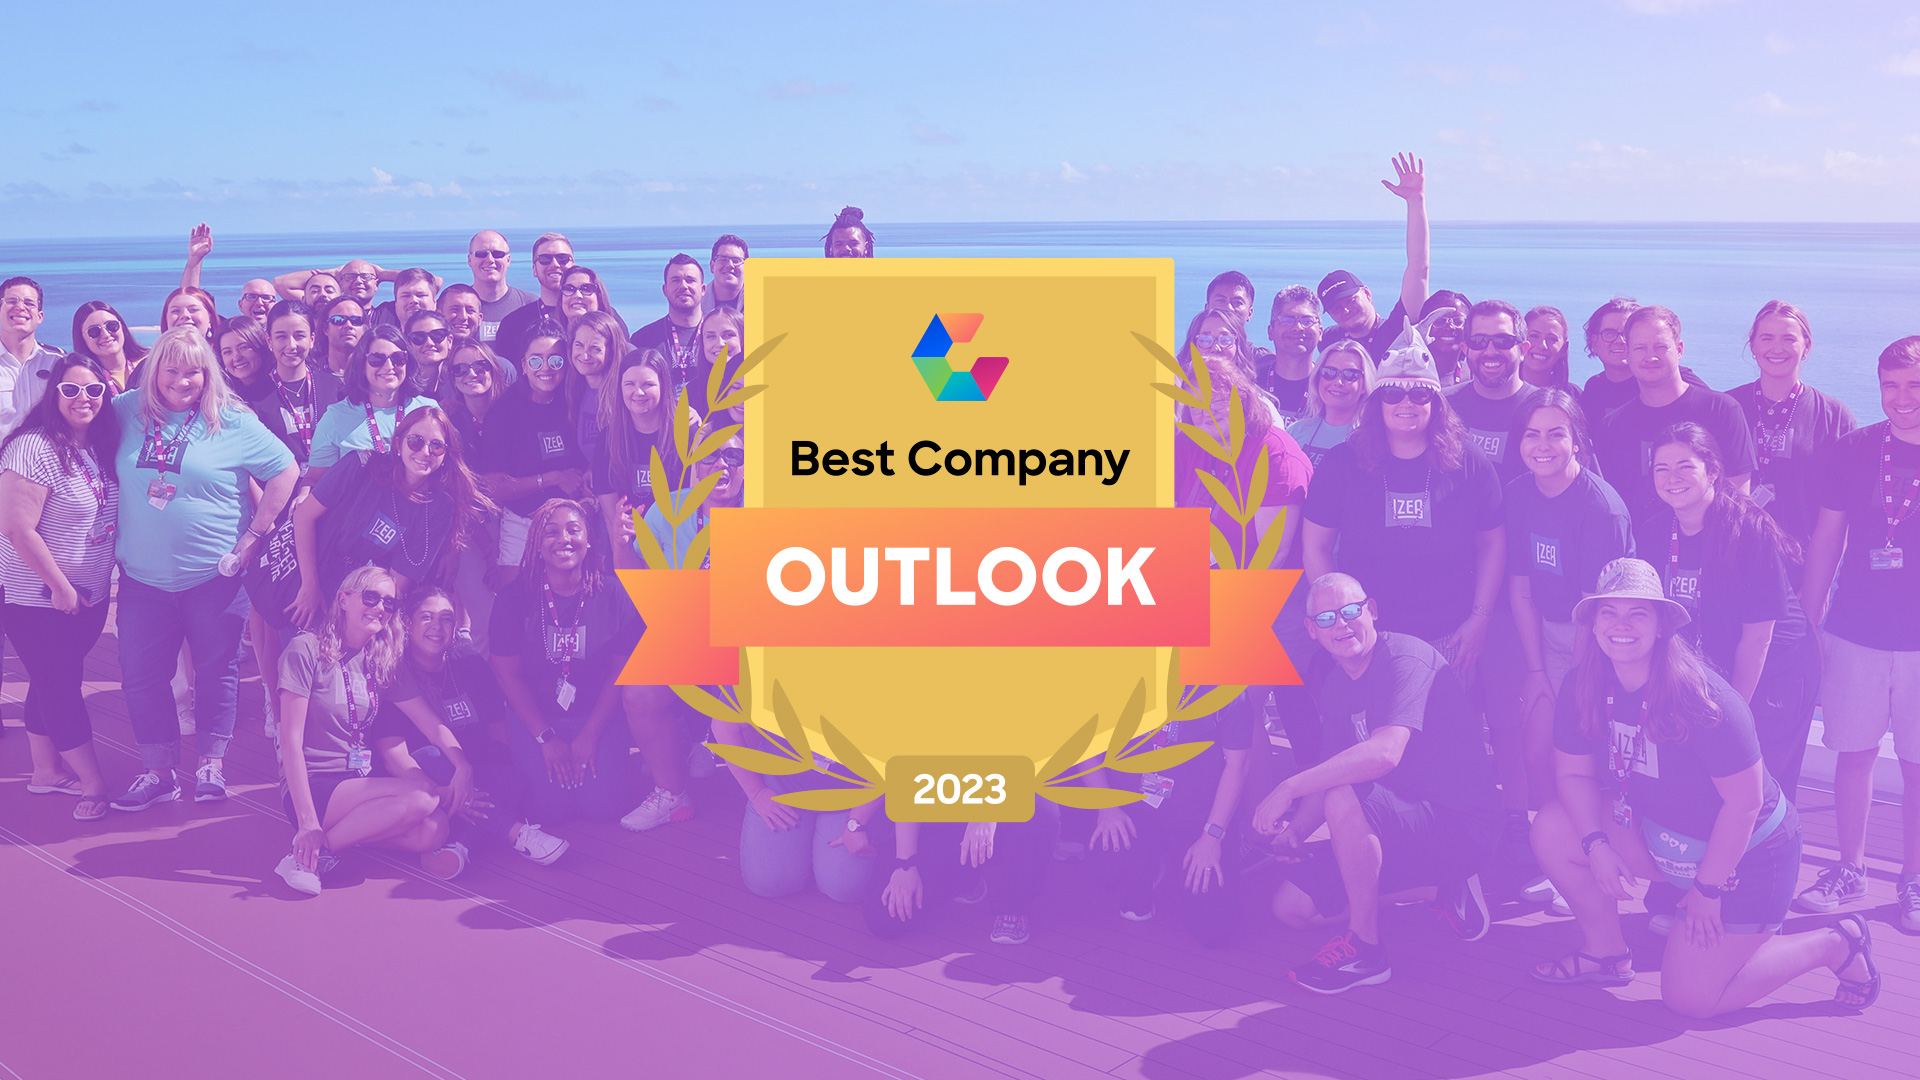 PR-comparably-best-company-outlook-1920